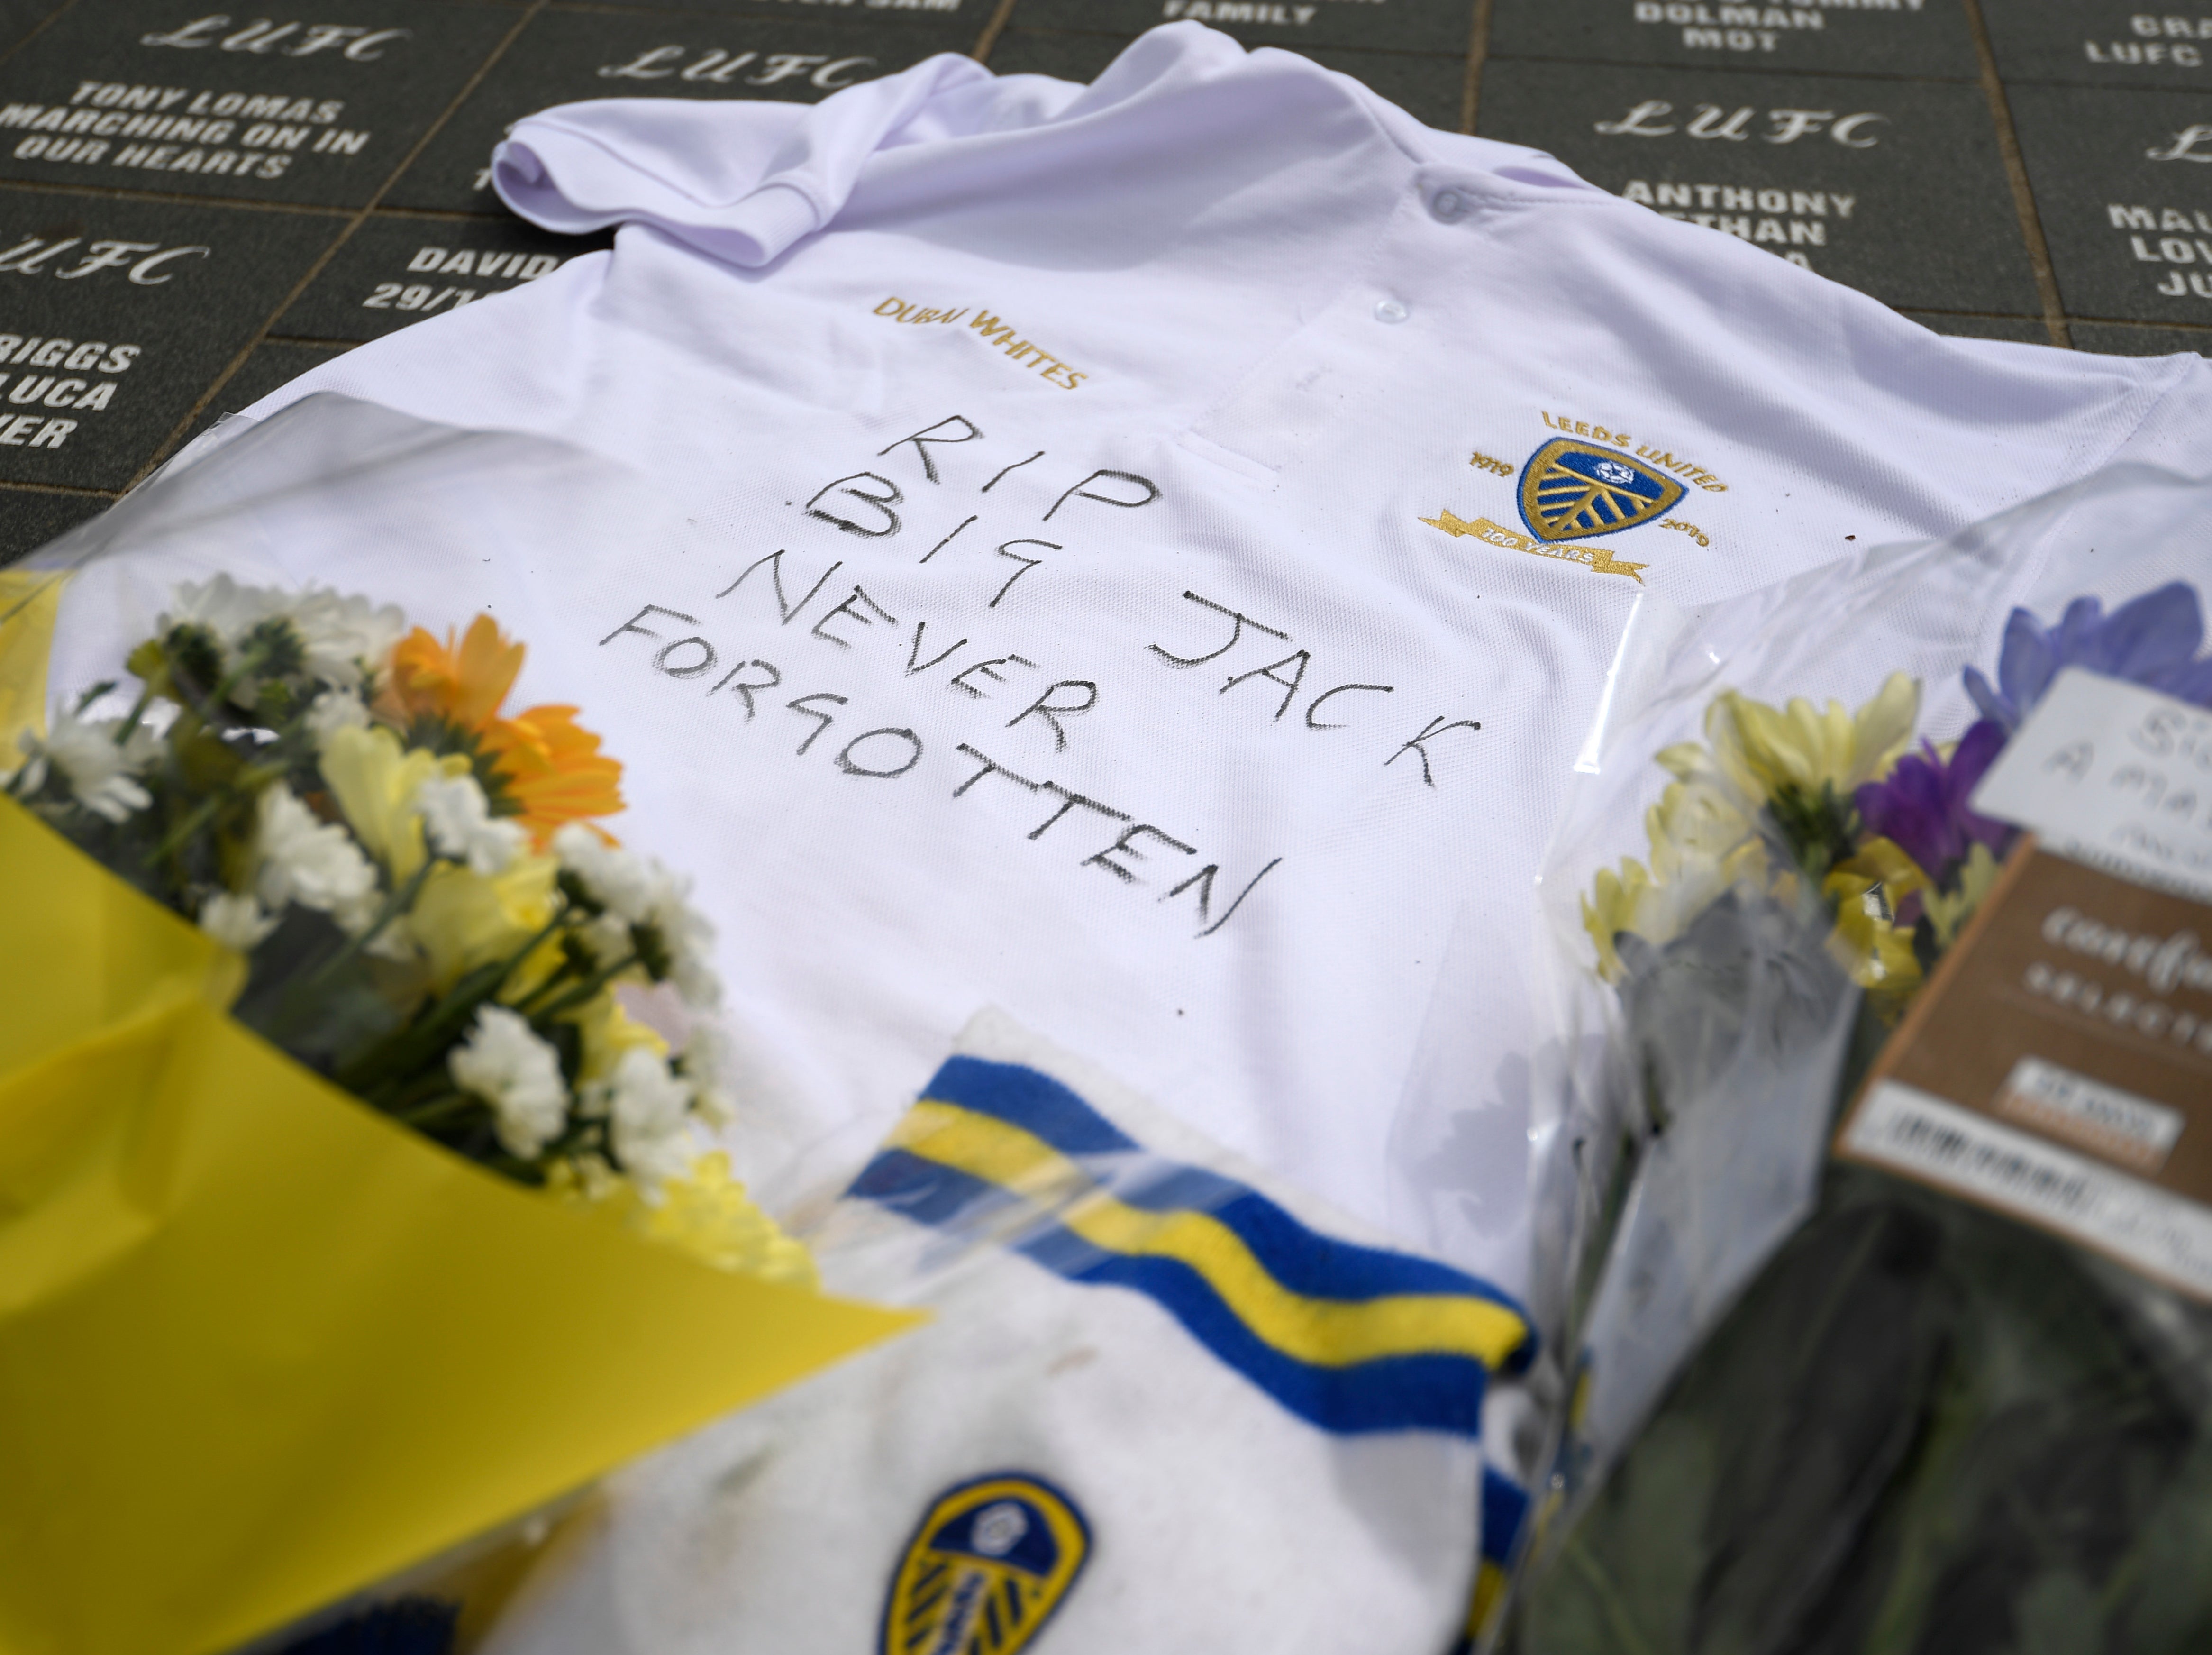 Leeds named the East Stand on Elland Road after the club's legend, Jack Charlton. - Eminetra.co.uk